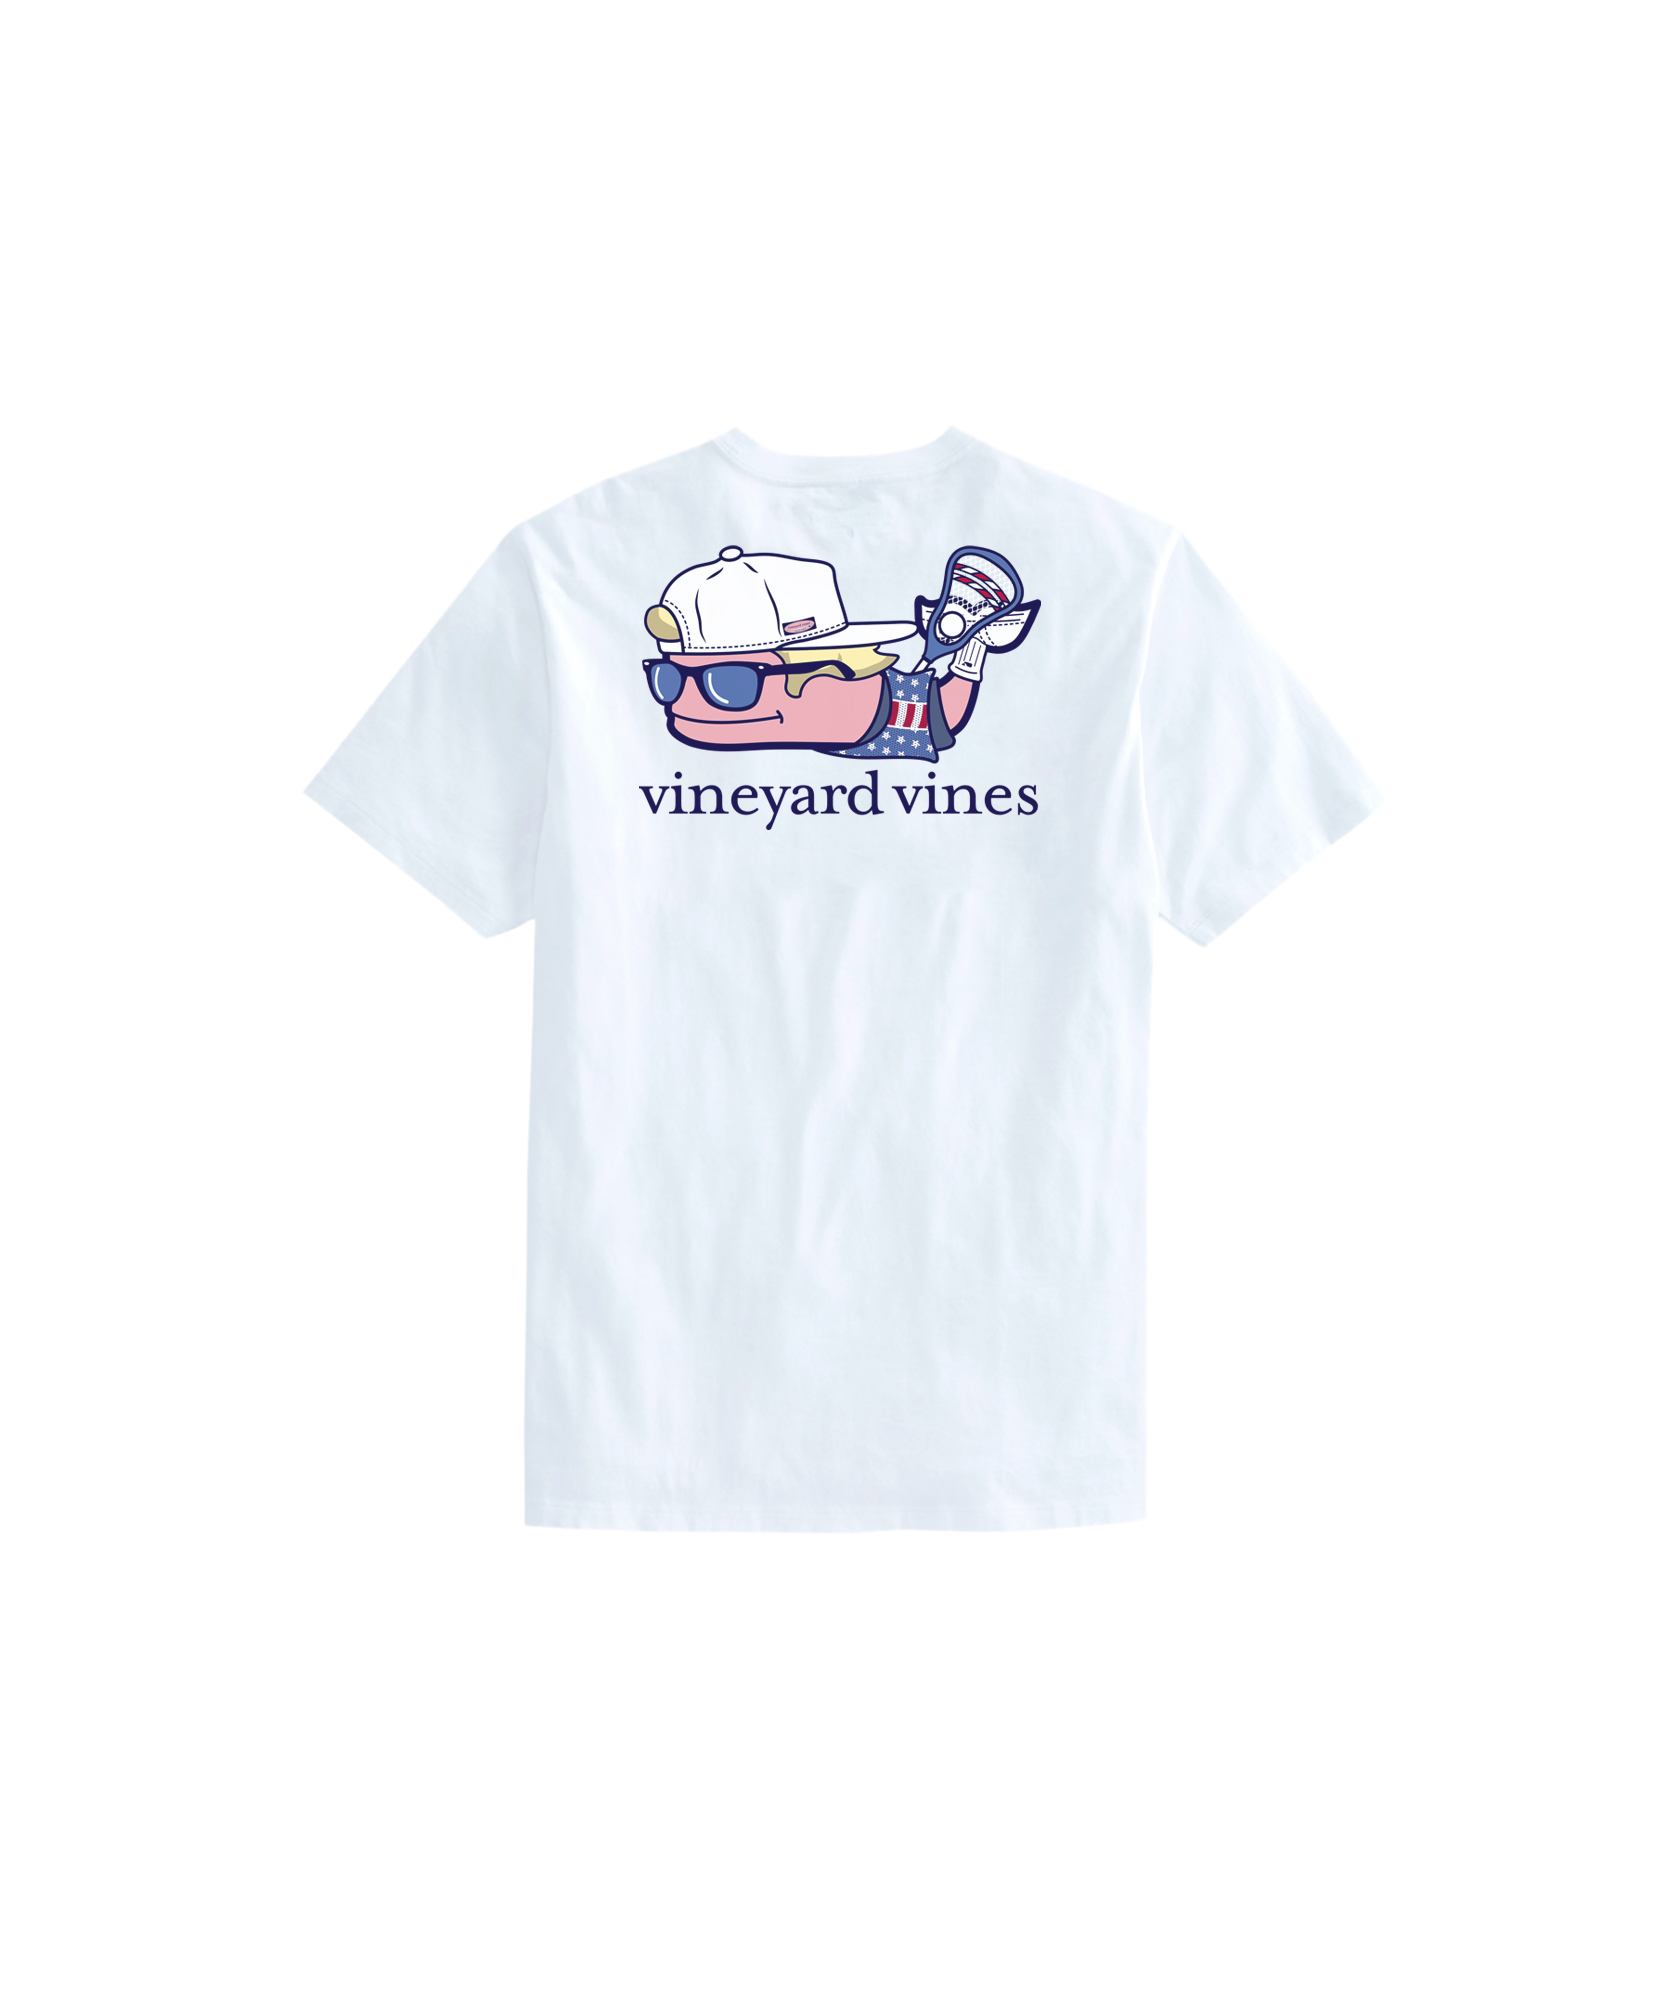 Shop OUTLET Lax Bro Whale Short-Sleeve Pocket Tee at vineyard vines